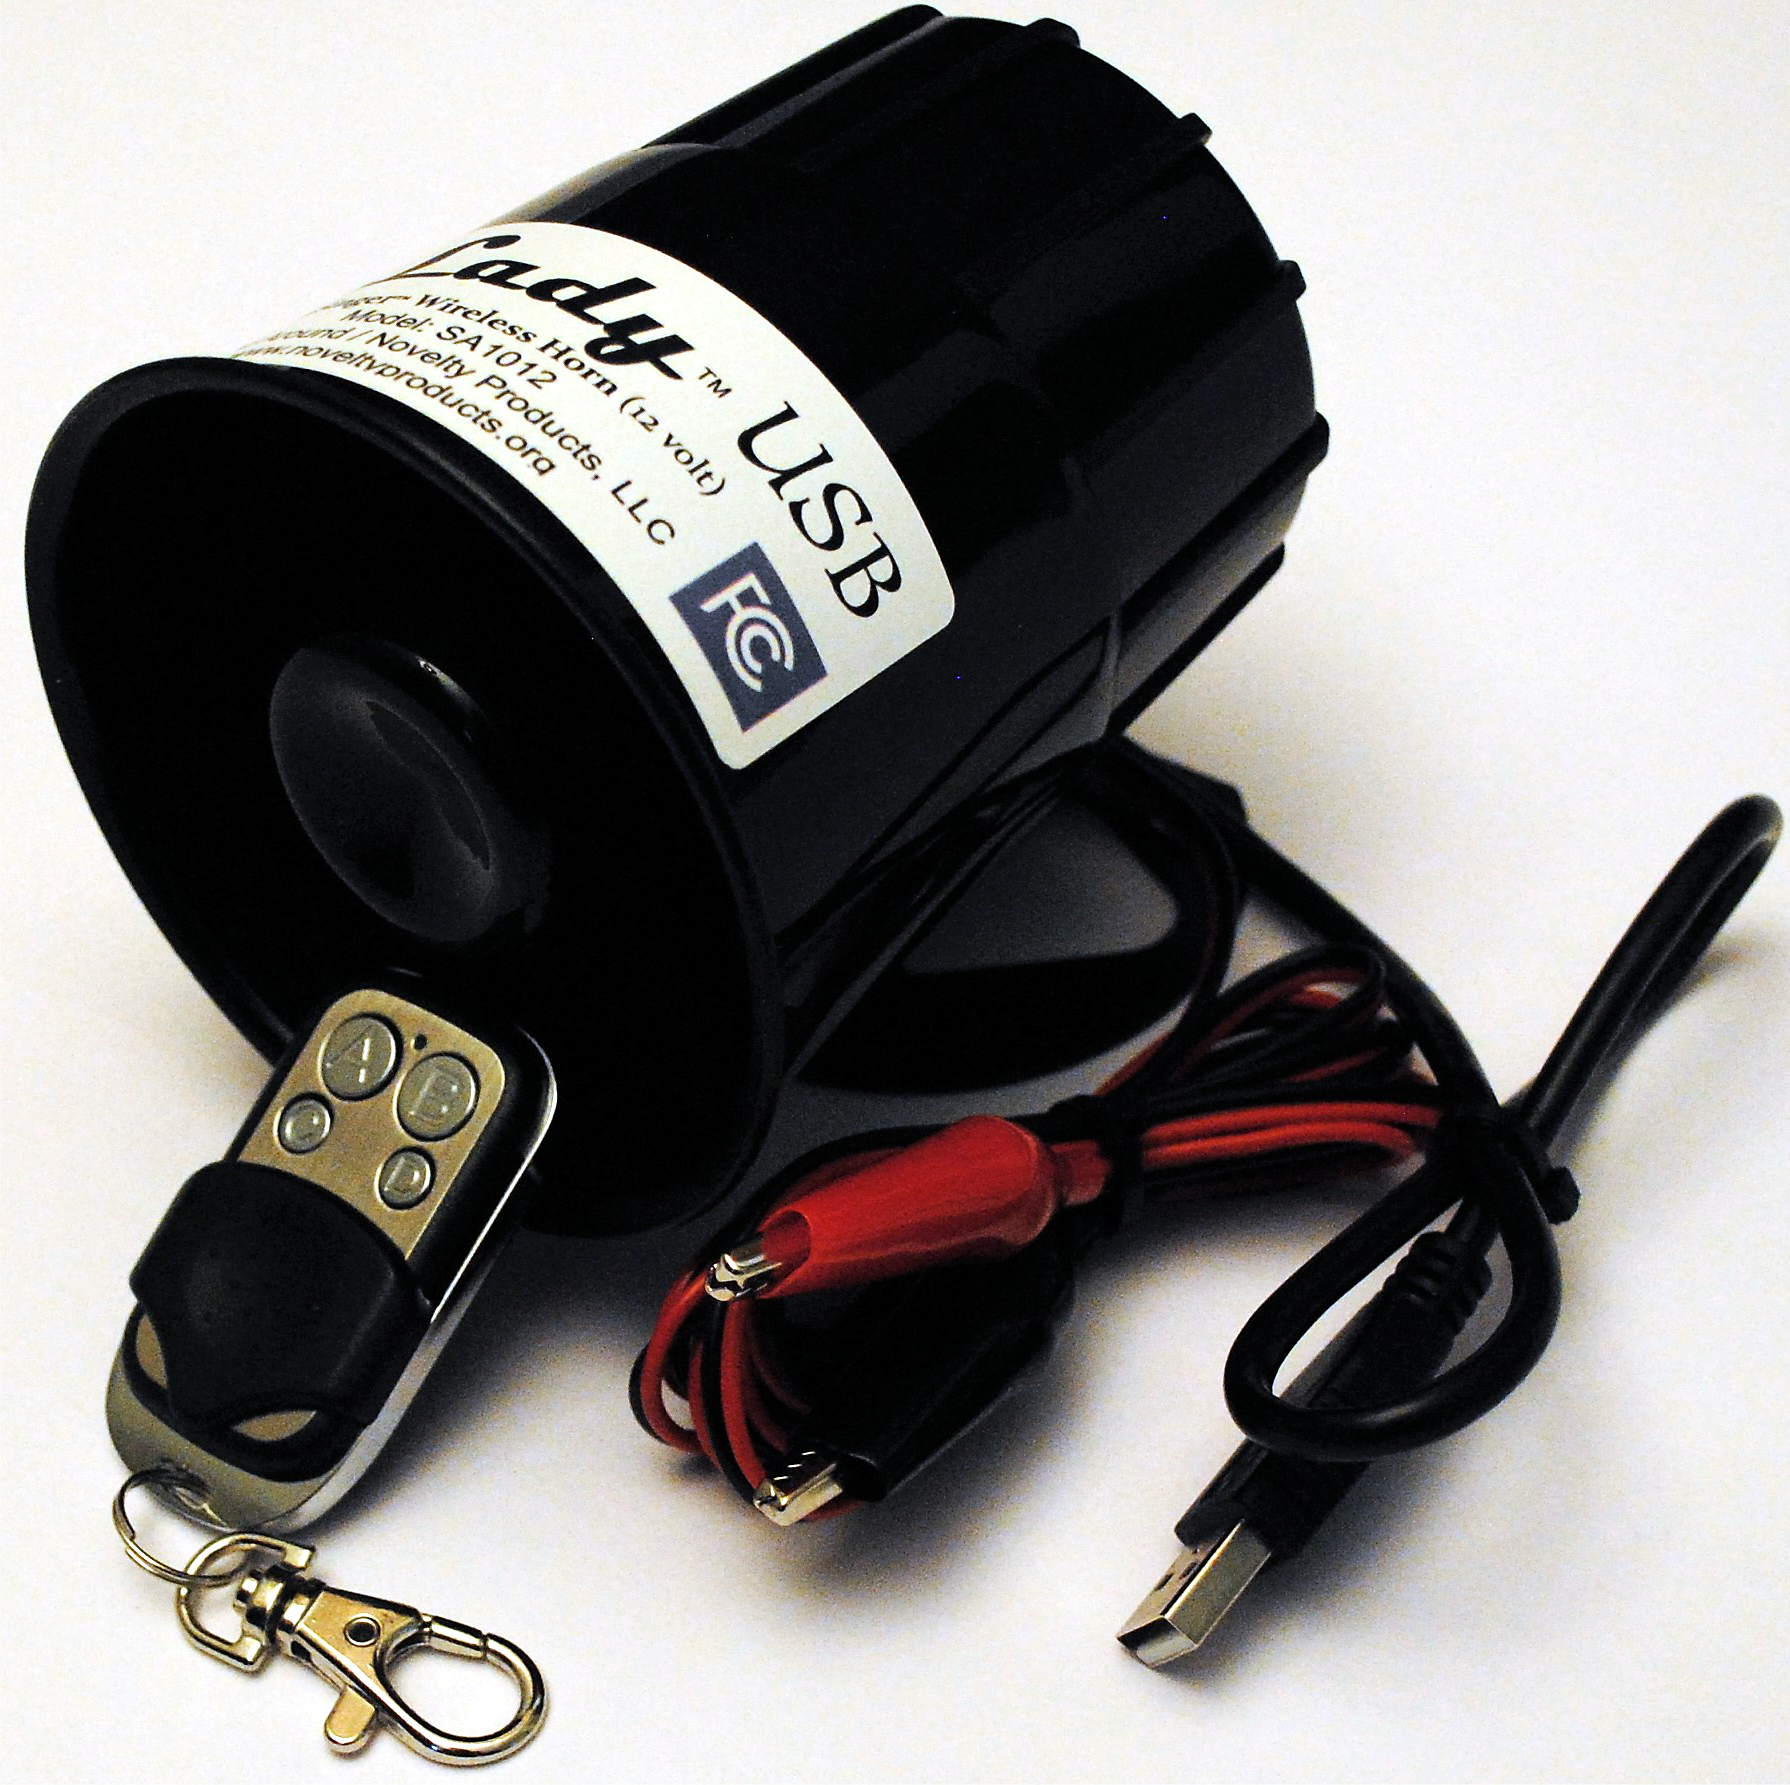 University of New Mexico USB Car Horn with Wireless KeyFOB Remote